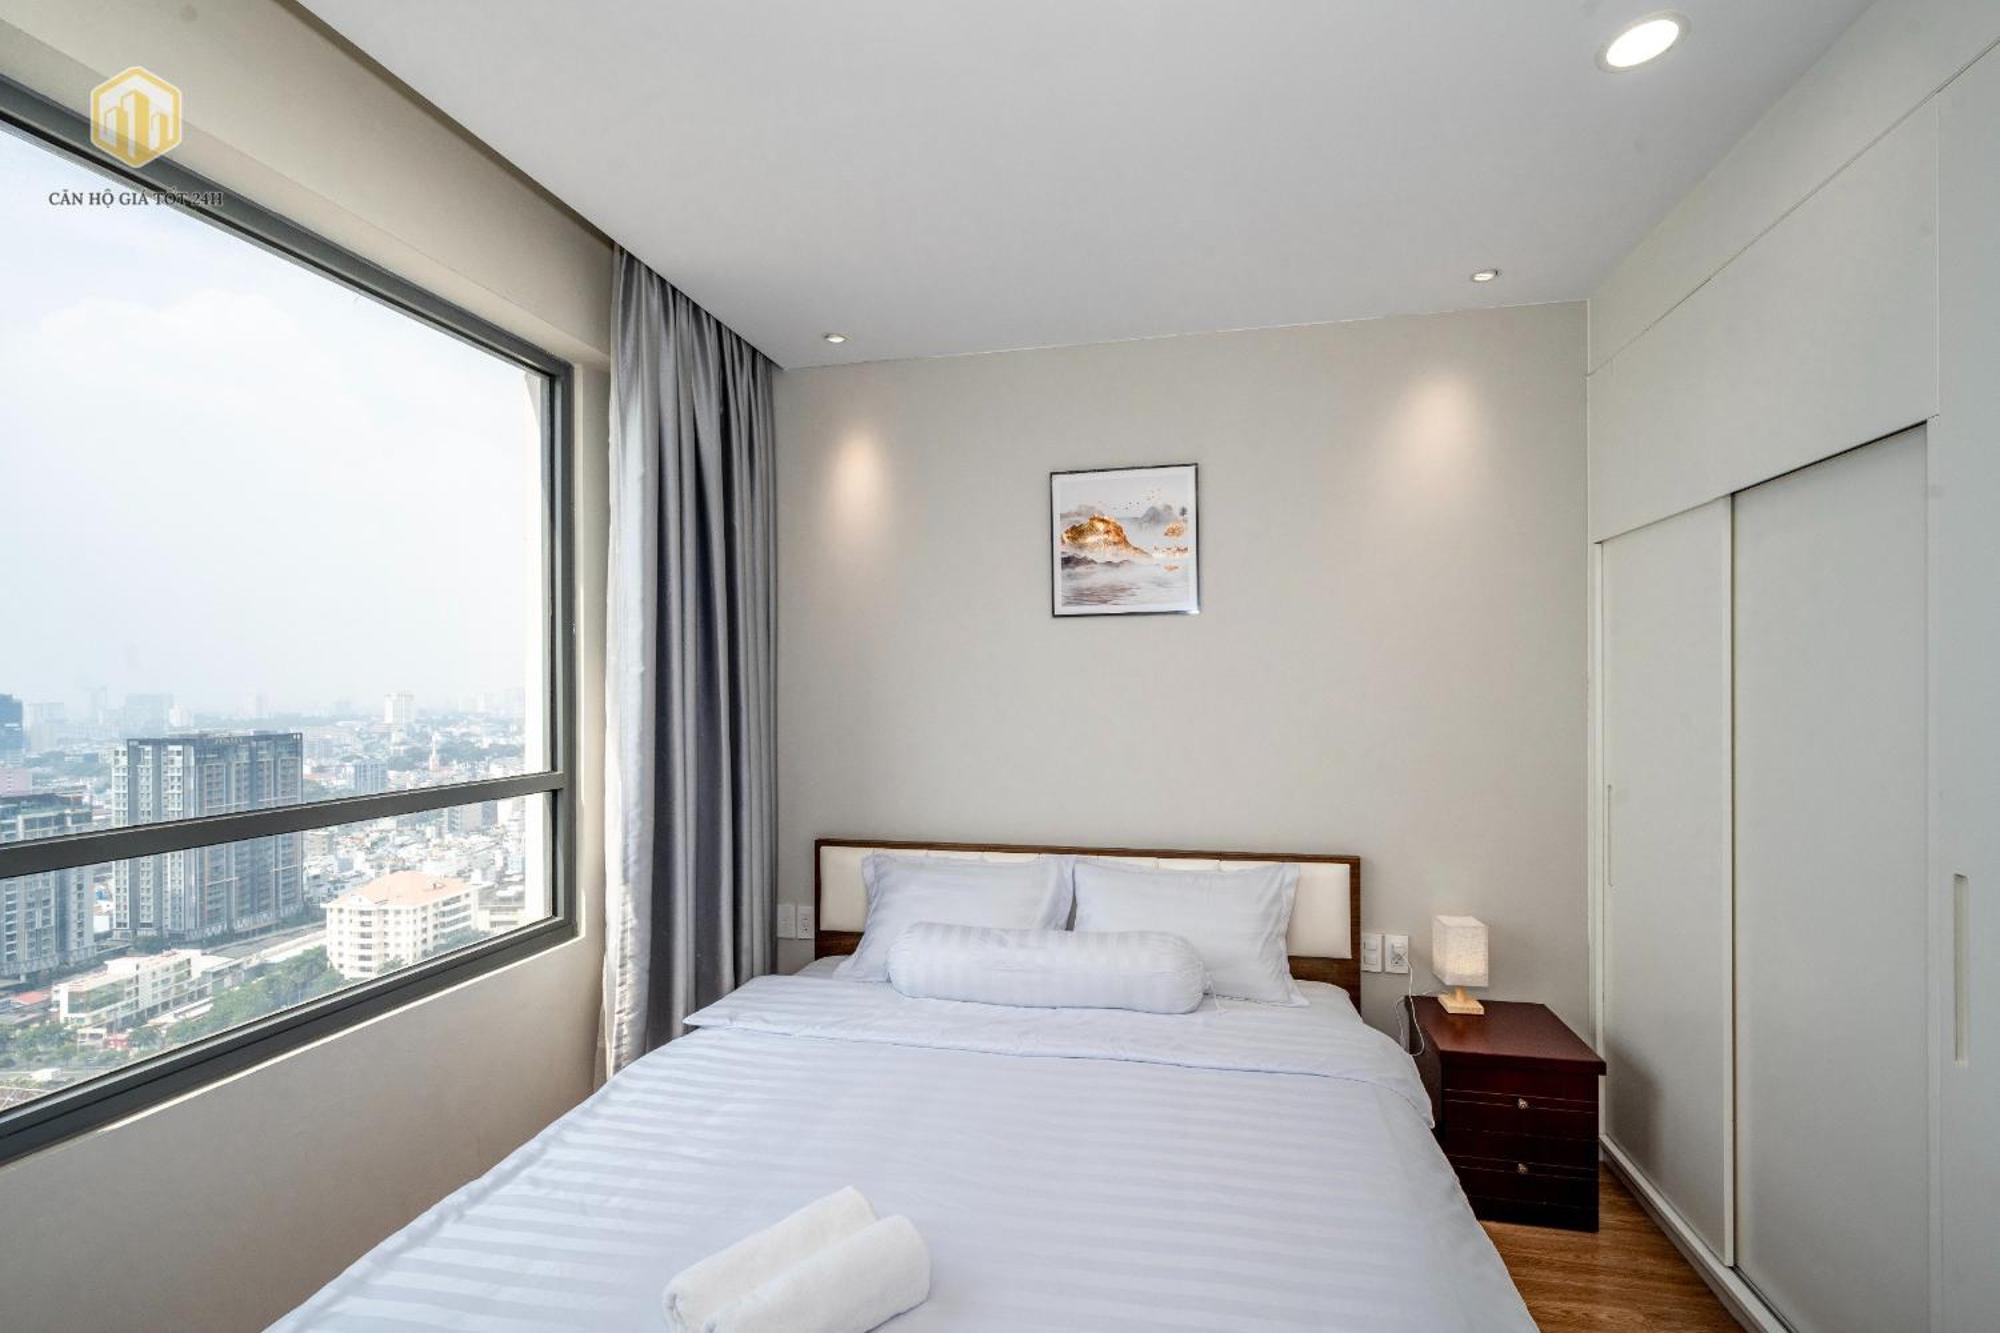 Cozy Apartment In District 4-City Center - Free Netflix - Canhogiatot24H Ho Chi Minh City Exterior photo